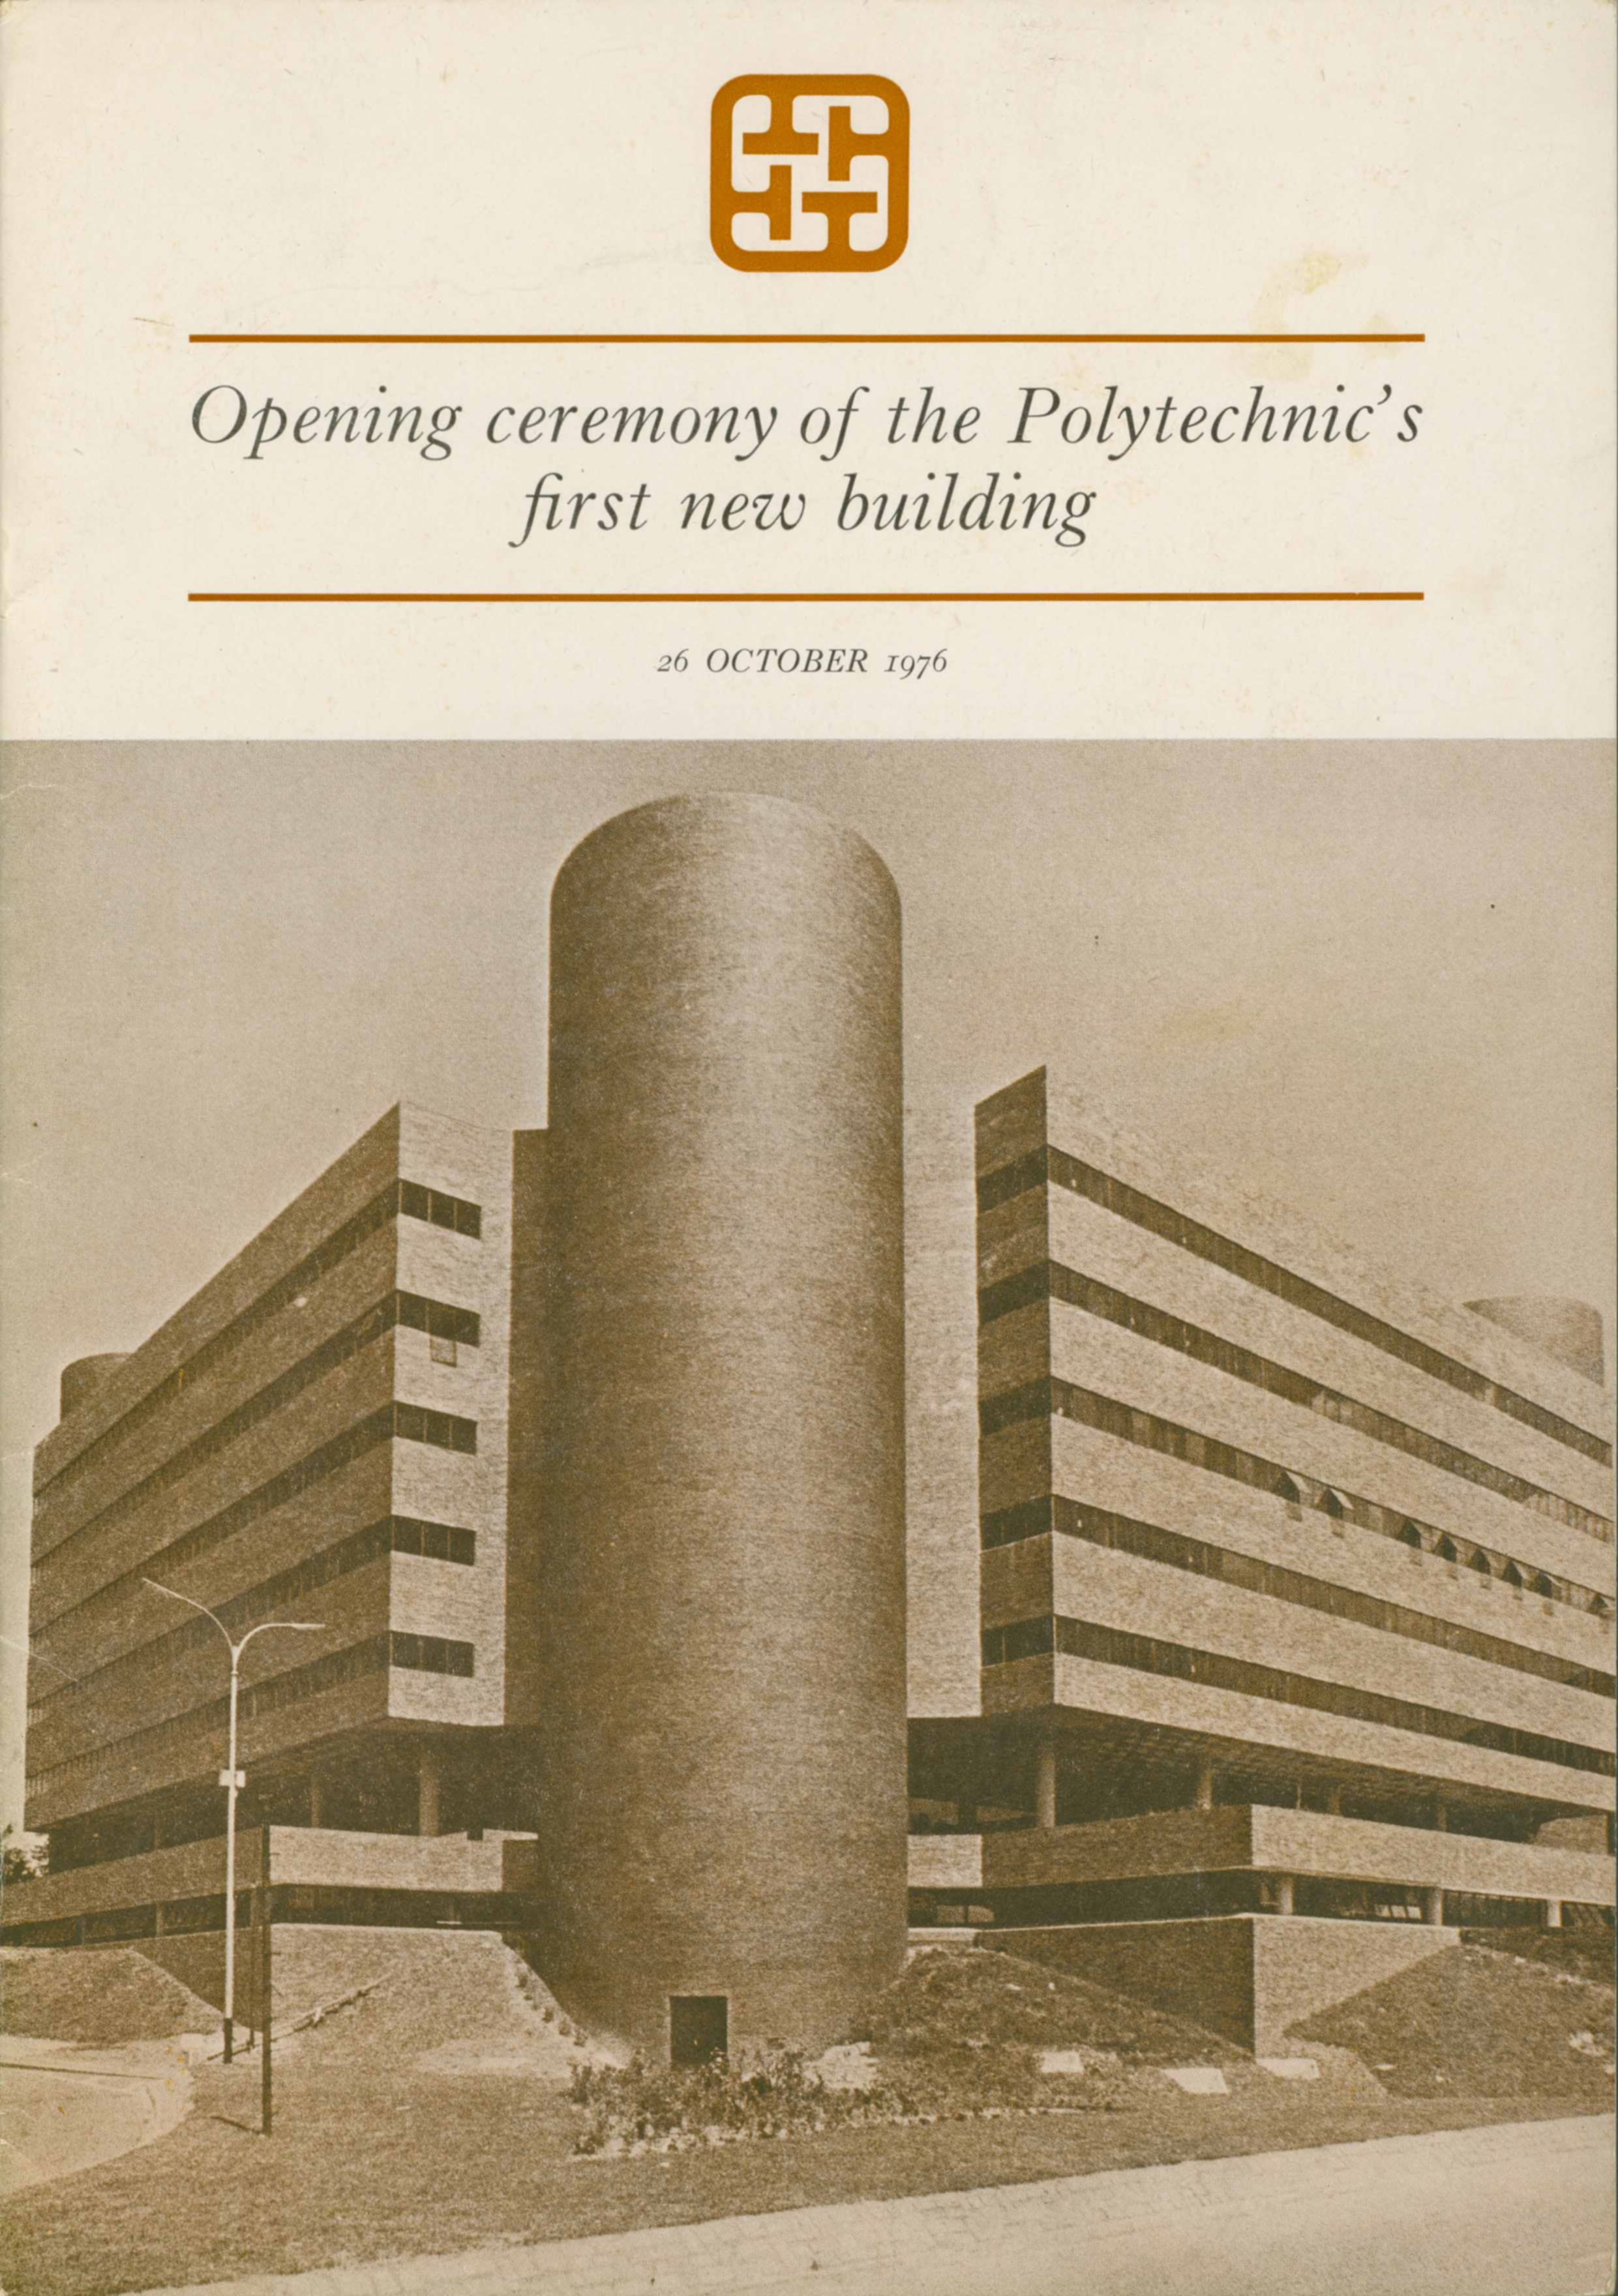 Opening ceremony of the Polytechnic's first new building. 26 October 1976